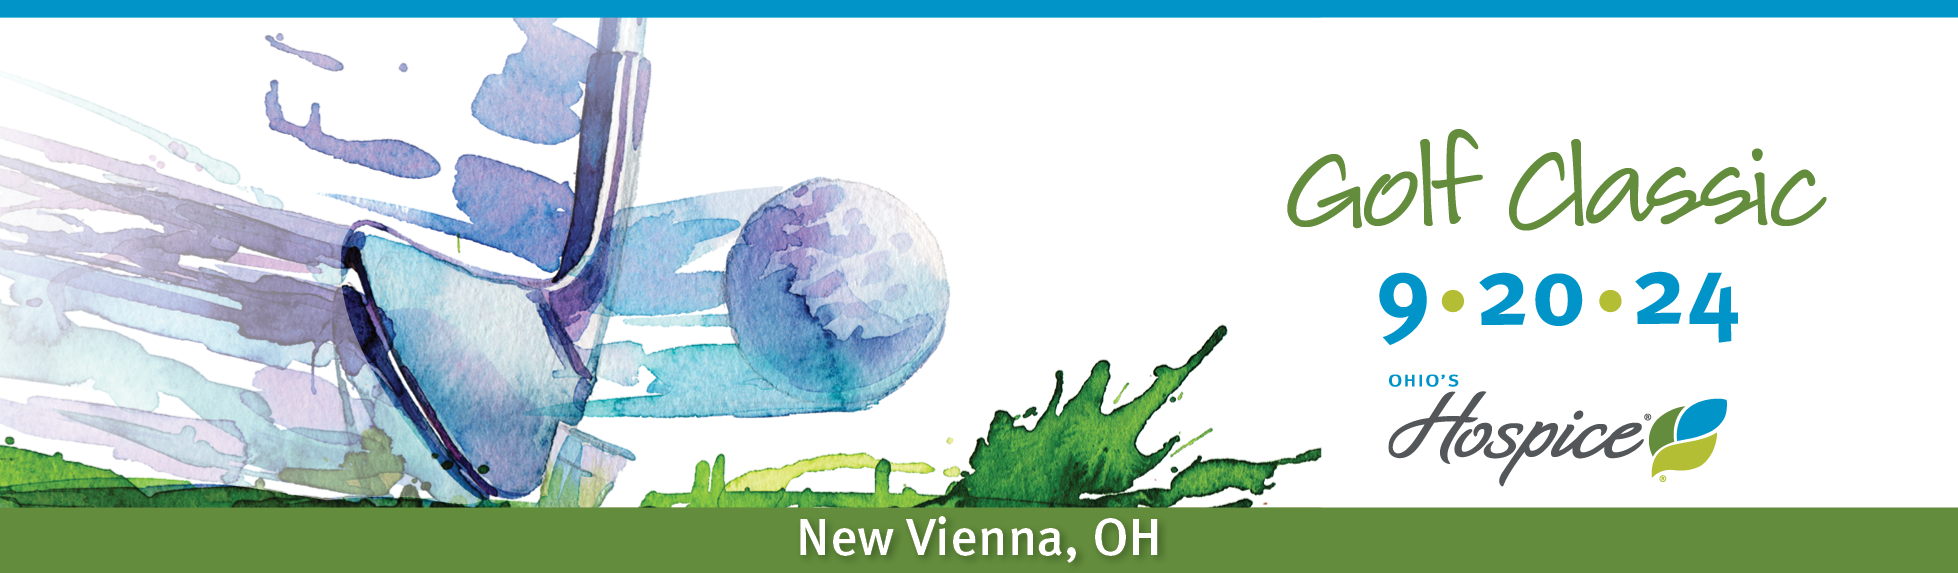 Community Care Hospice 2024 Golf Classic 9.20.24 New Vienna, OH